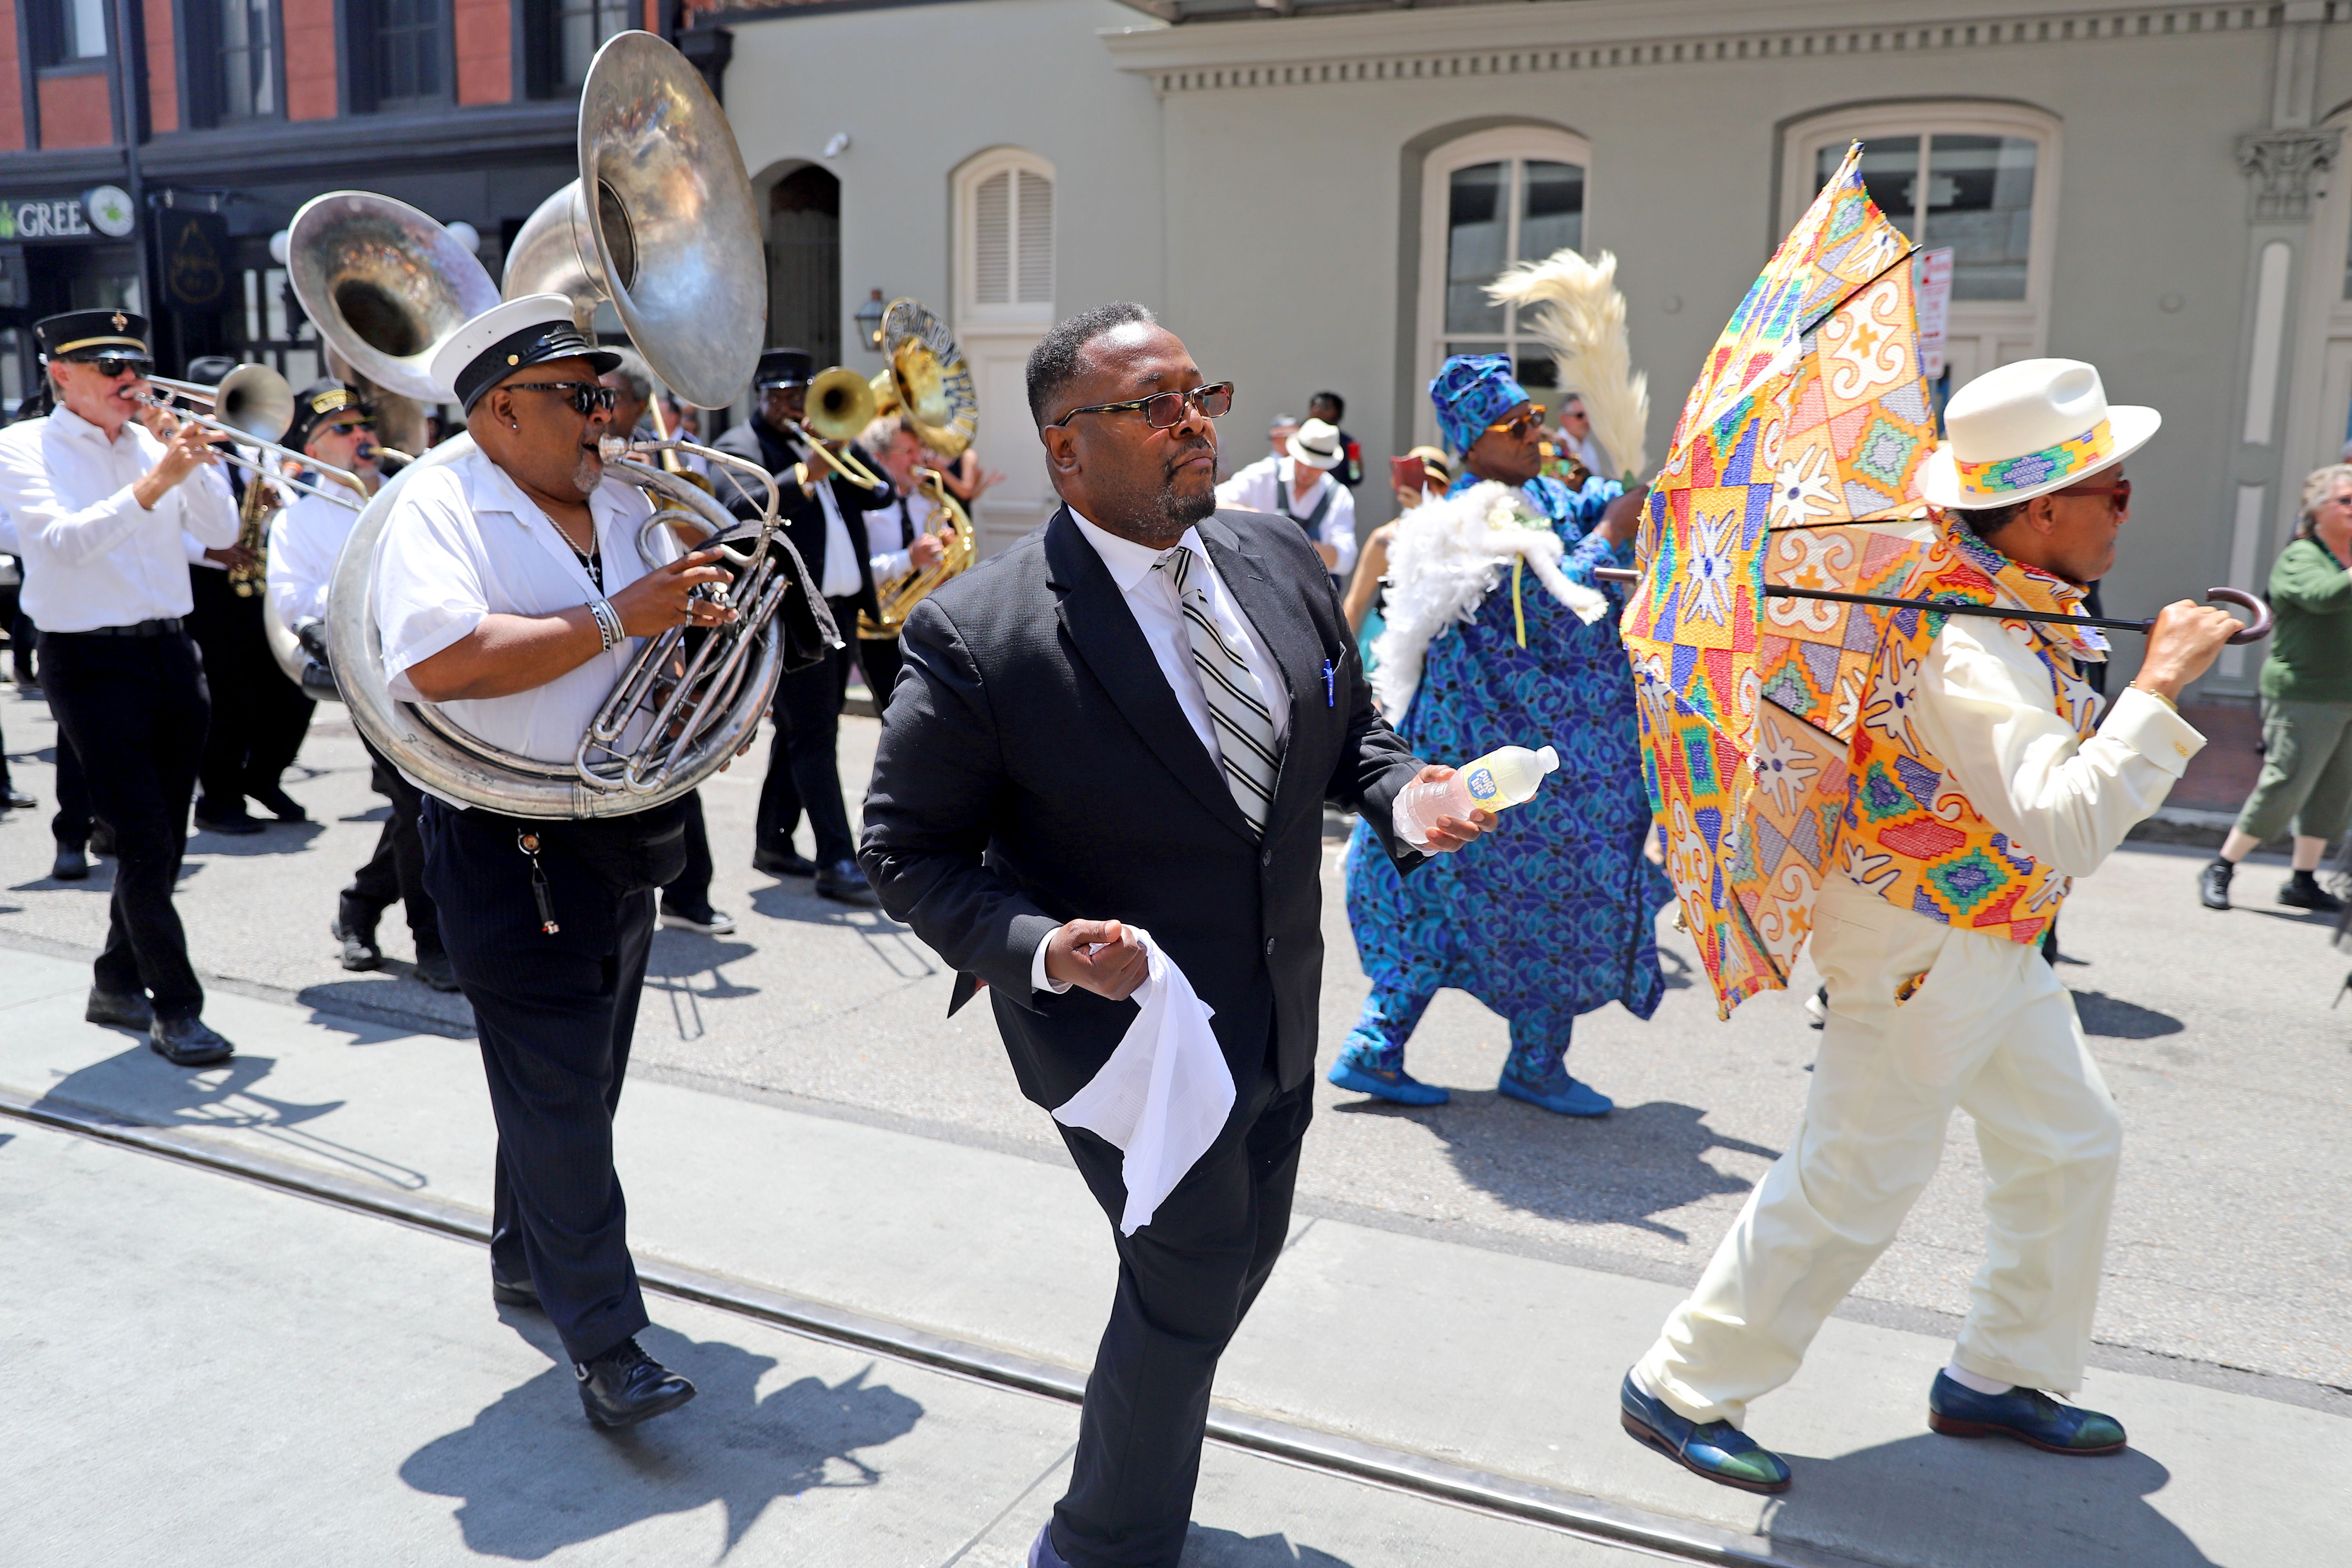 Wendell Pierce, wearing a suit, second-lines with a brass band through the French Quarter.